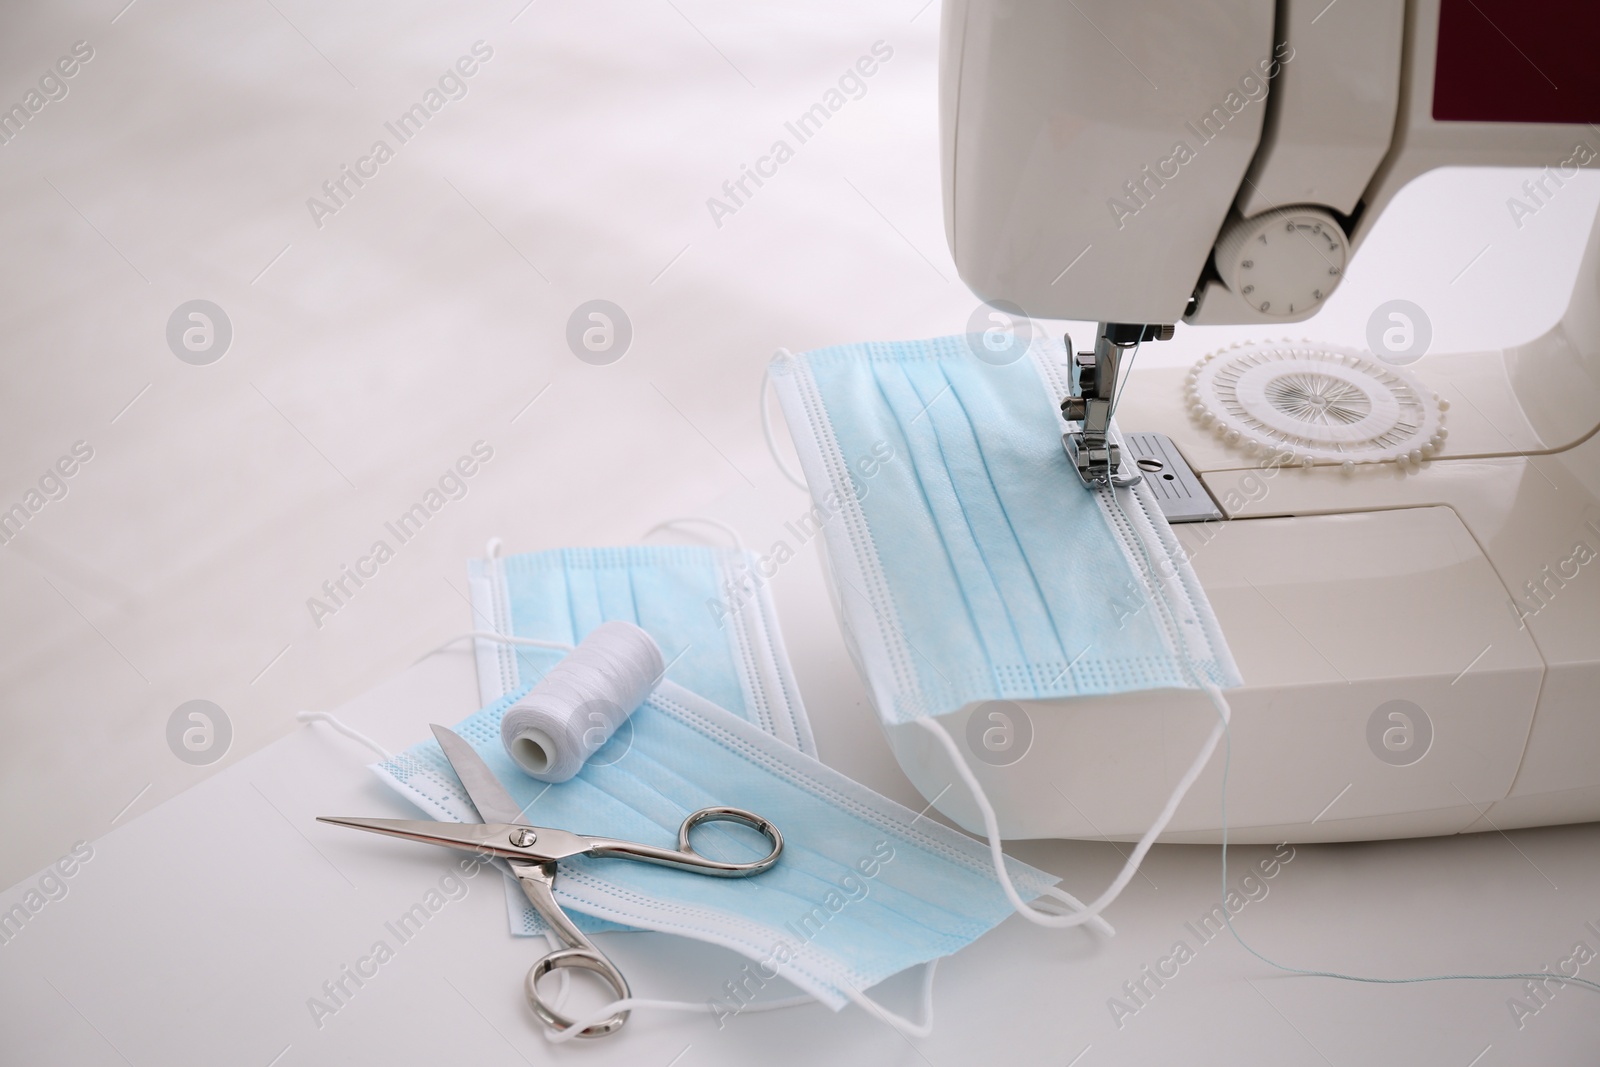 Photo of Sewing machine with disposable face mask on table, space for text